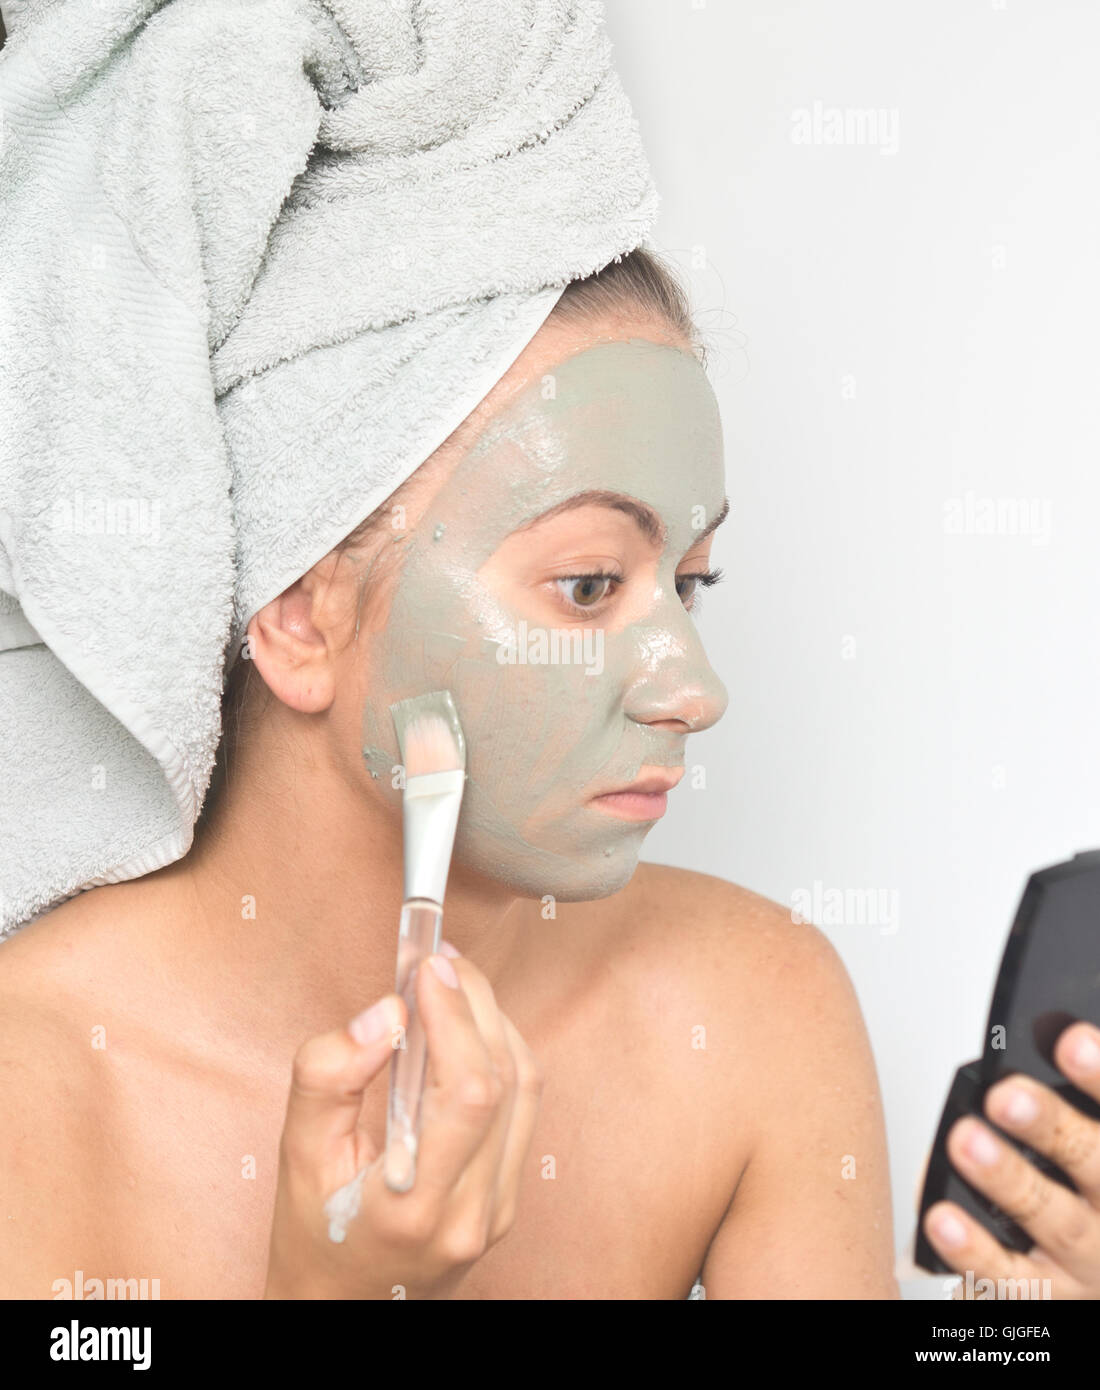 young woman applying facial clay mask to her face using brush Stock Photo